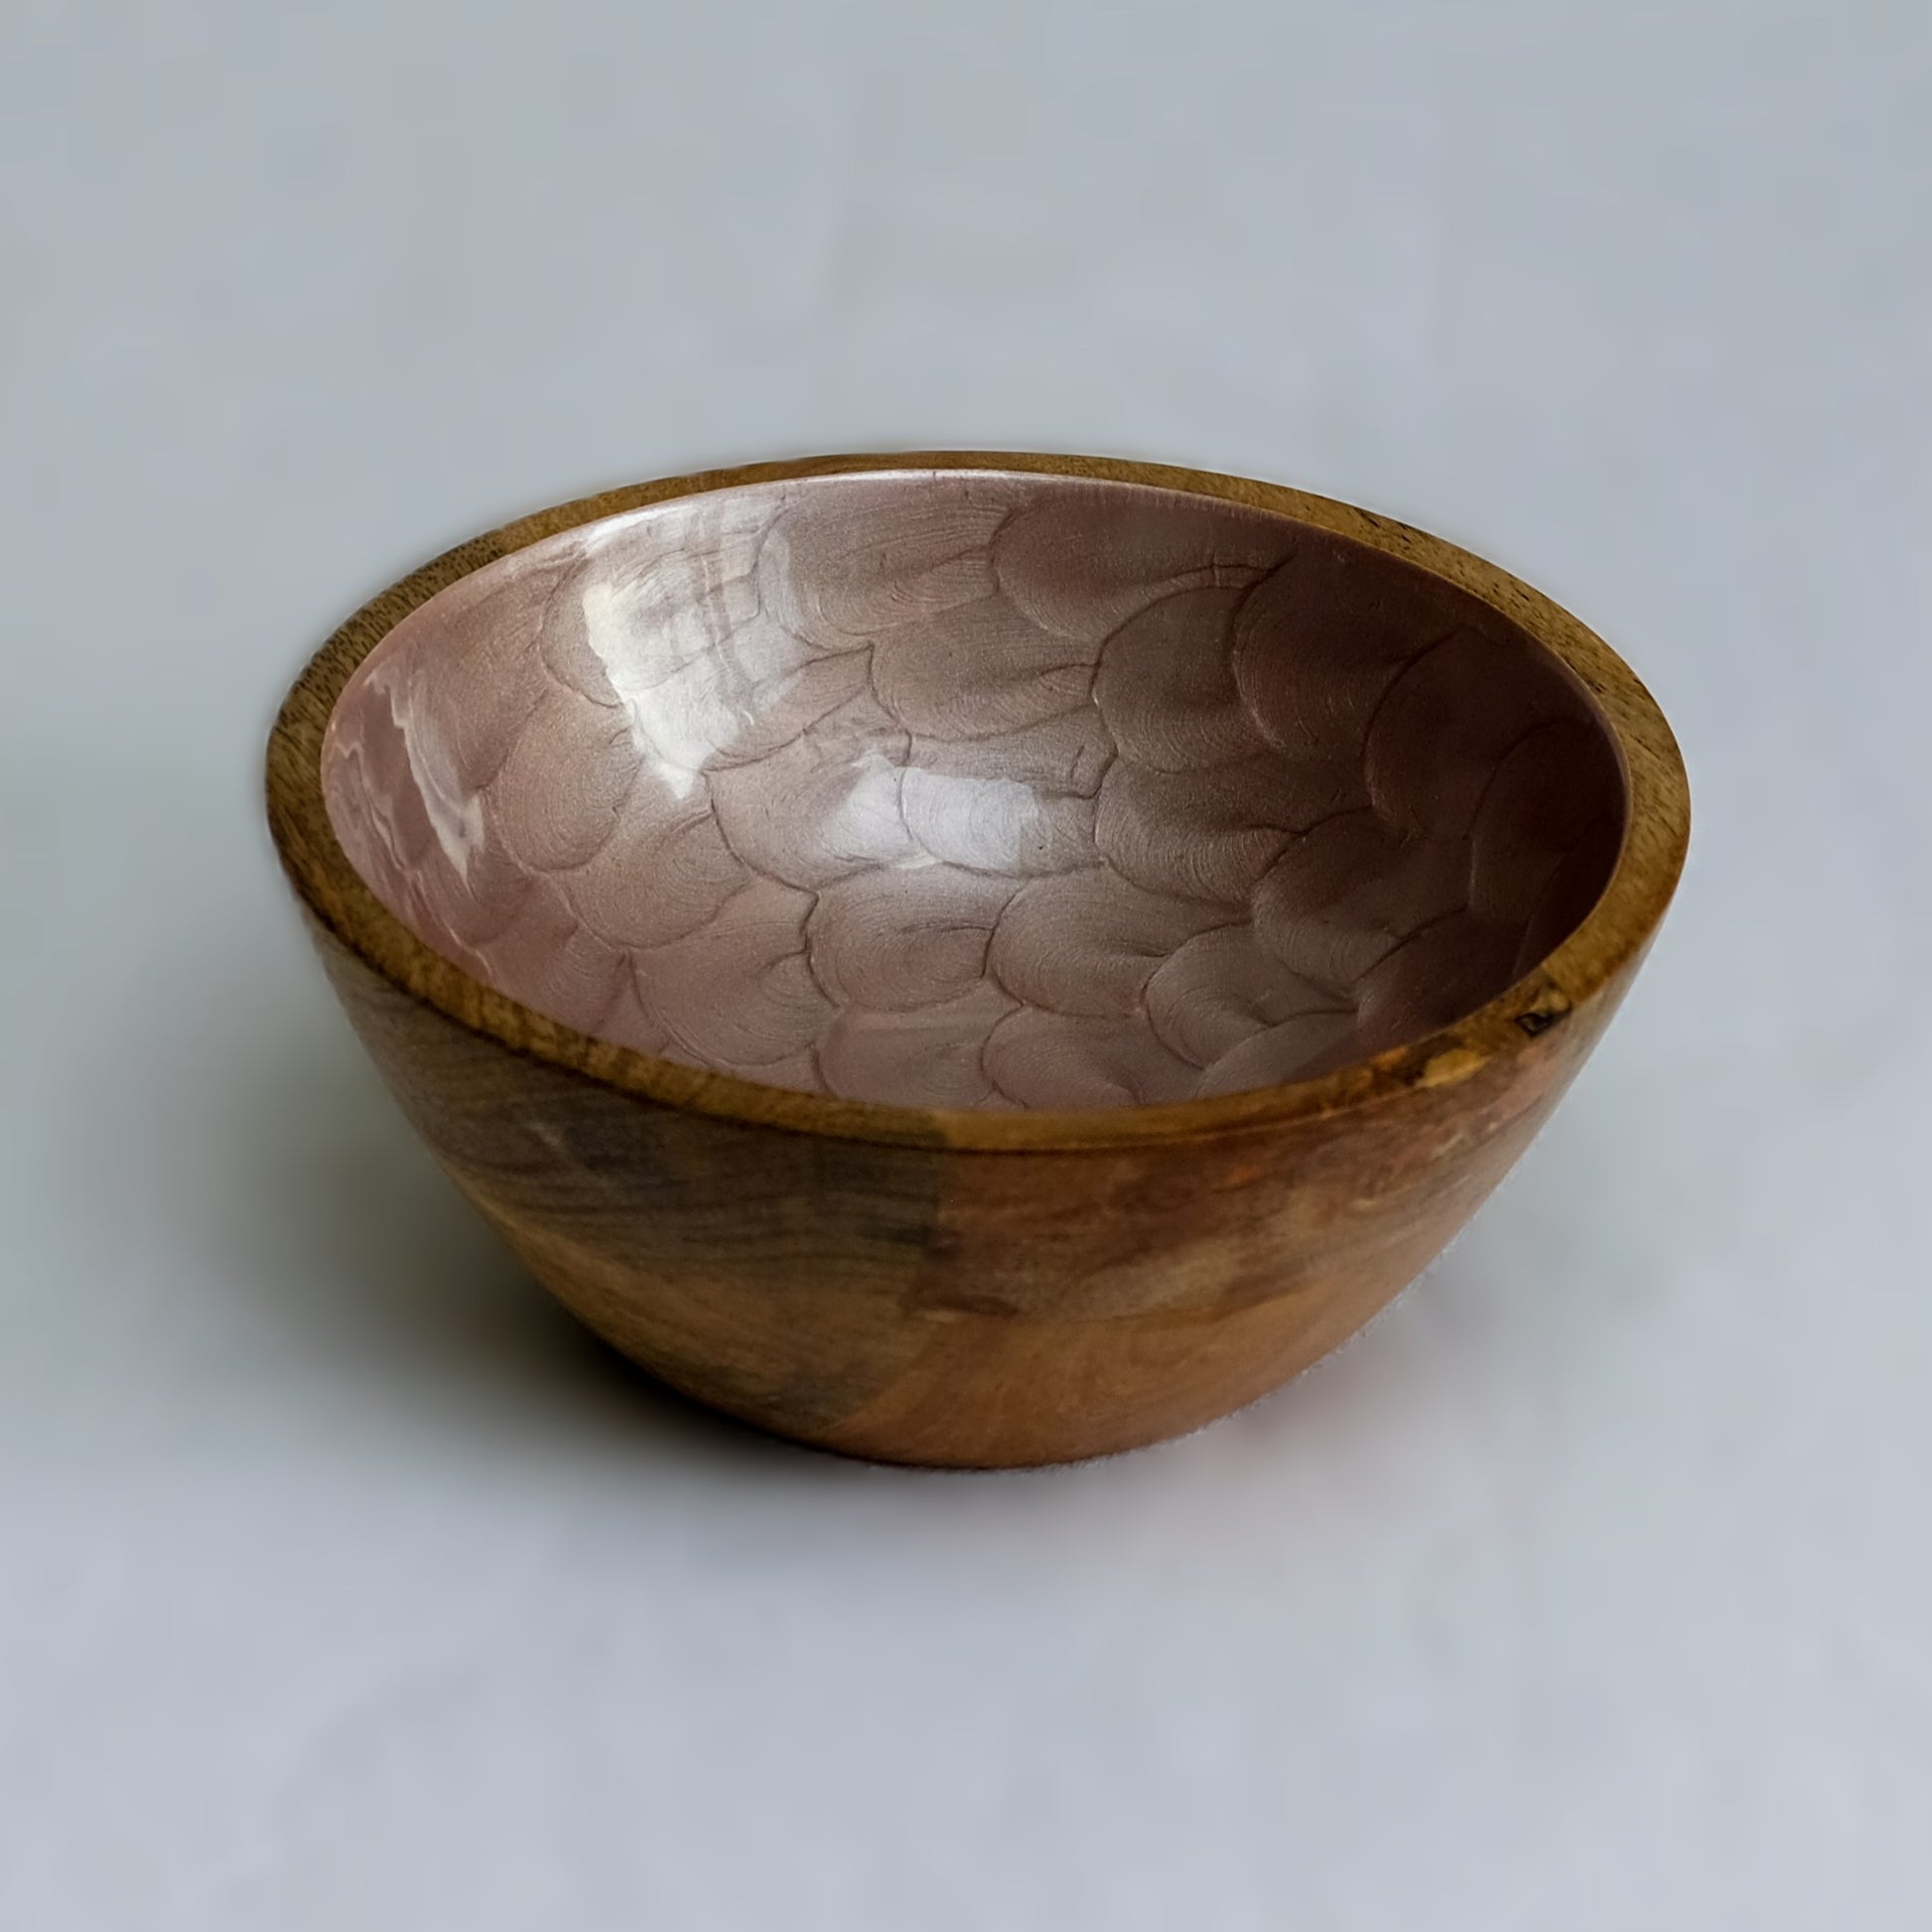 Small hand-painted bowl (18cm) in mole pink with a pearl finish. Made with sustainable mango wood. Suitable for cold & warm food or as an individual decorative piece.